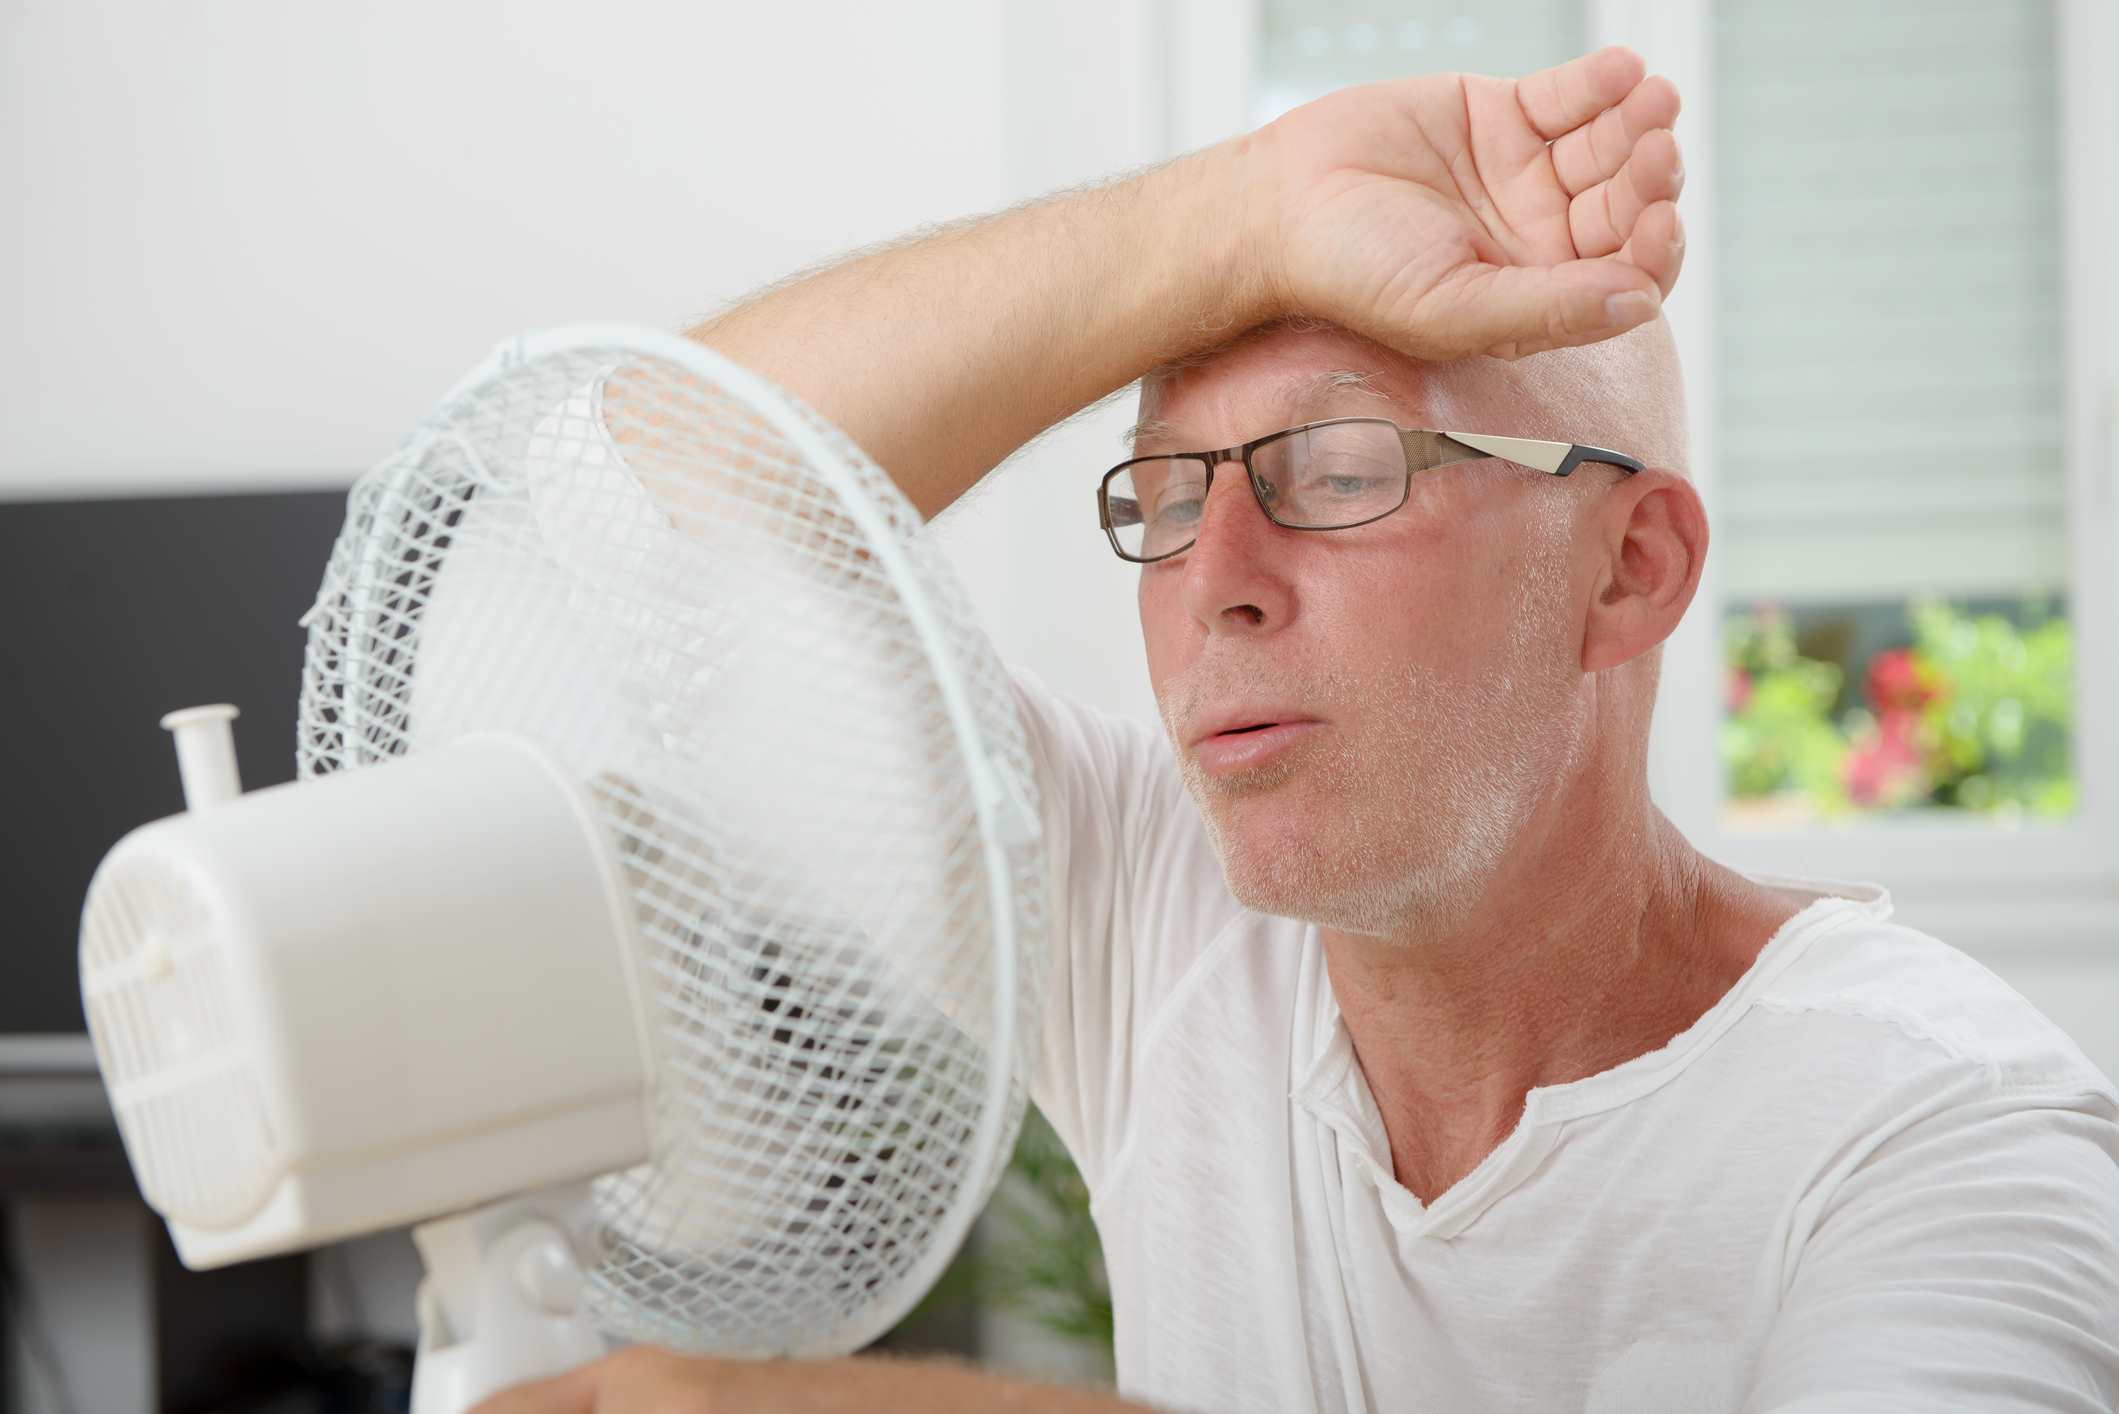 Meds for certain chronic conditions trigger  heat-related dangers